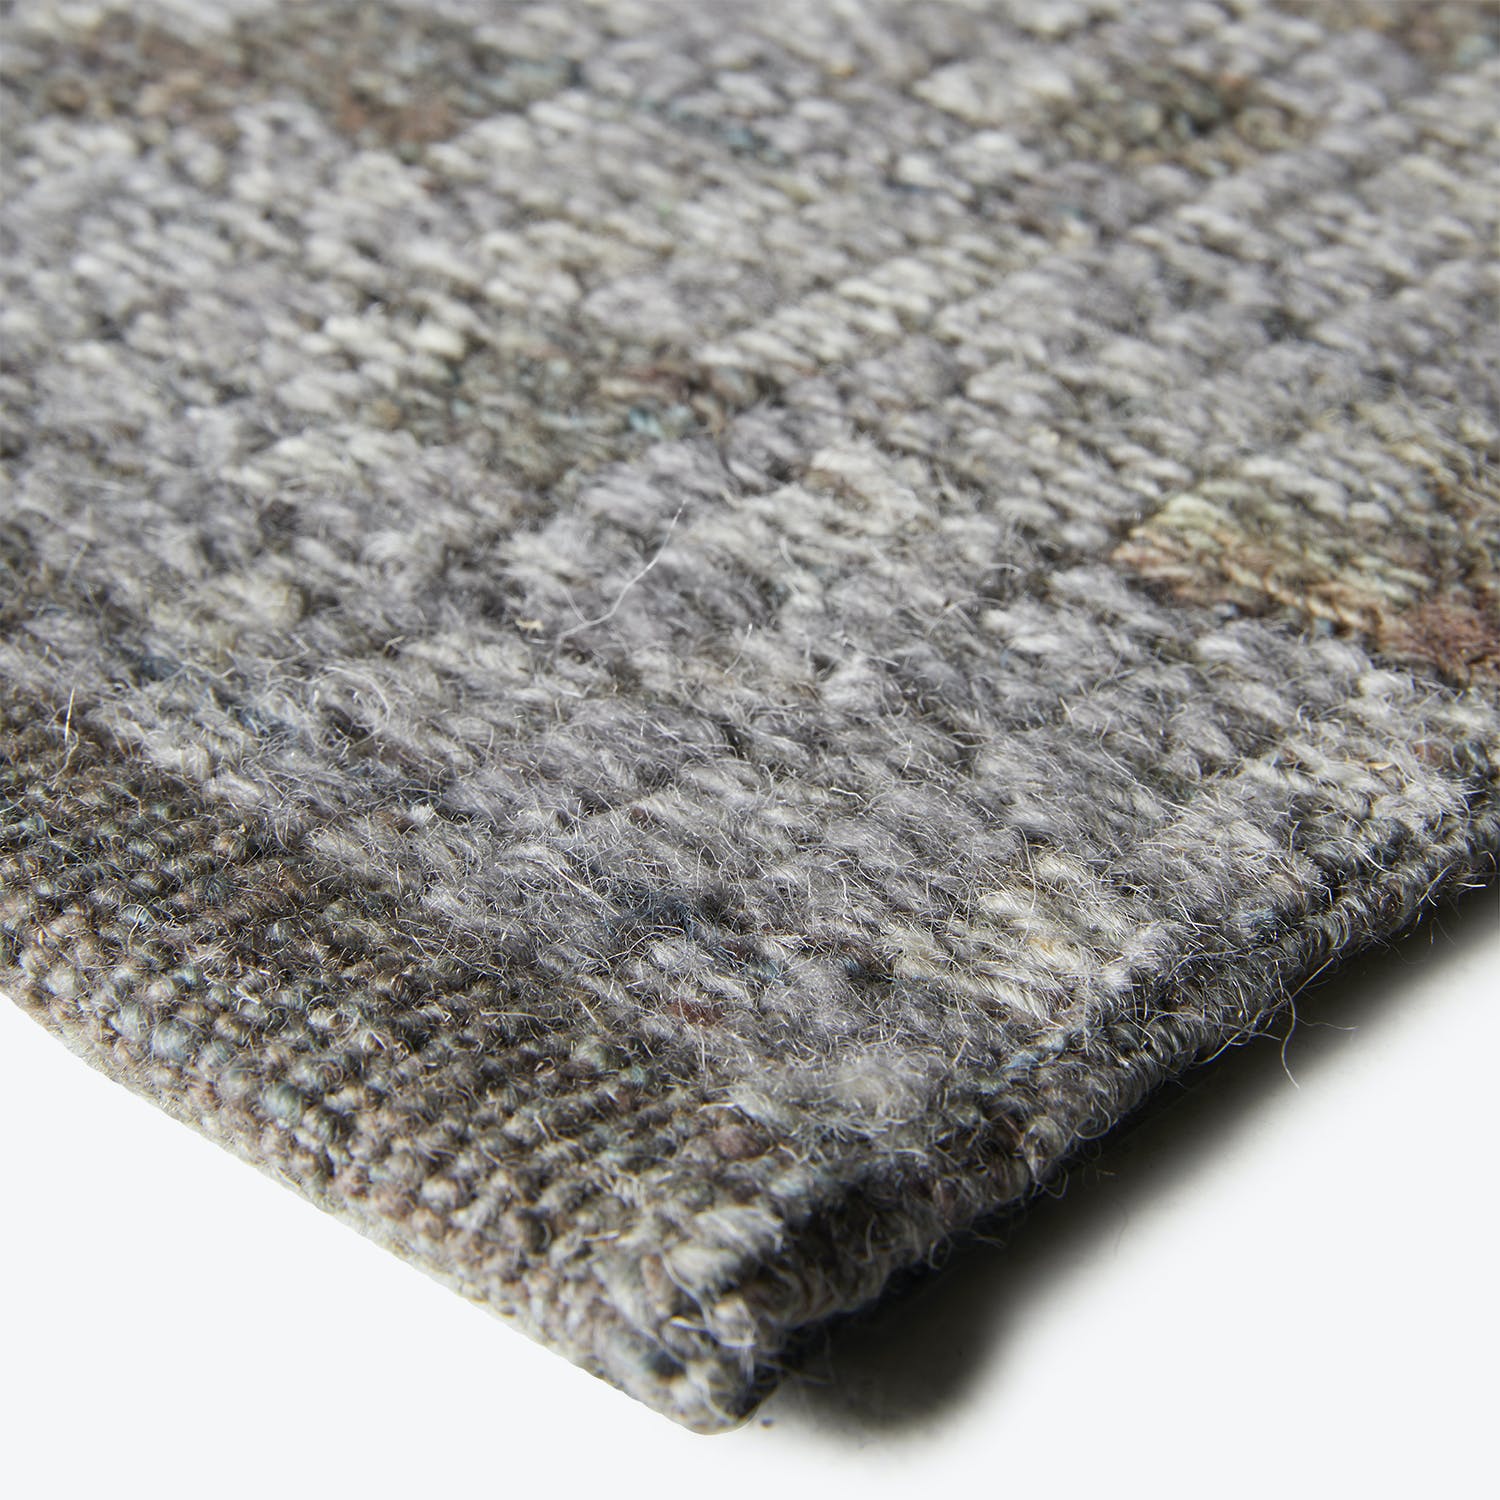 Close-up of textured fabric, possibly wool blend, with tight weave.